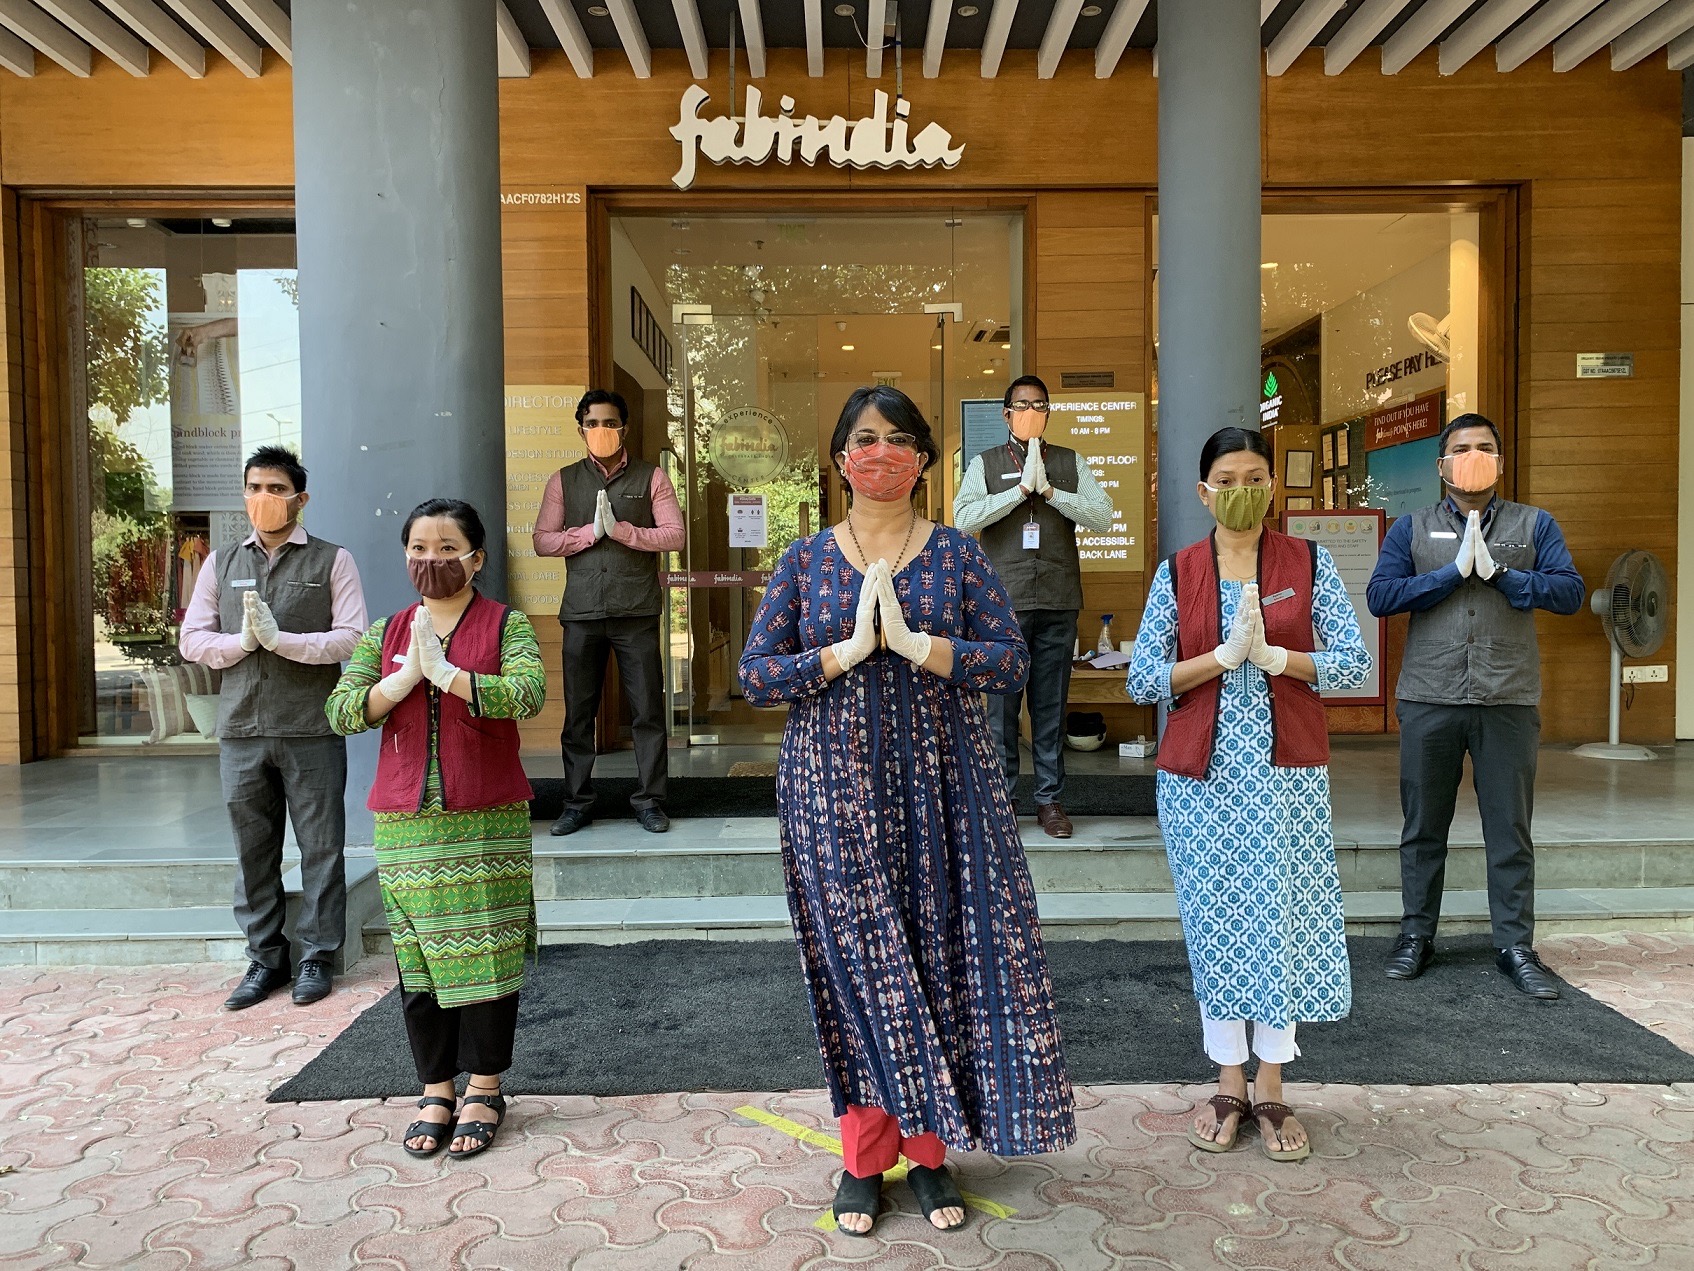 The Fabindia staff, ready to welcome customers back to store. (picture credit- Fabindia)